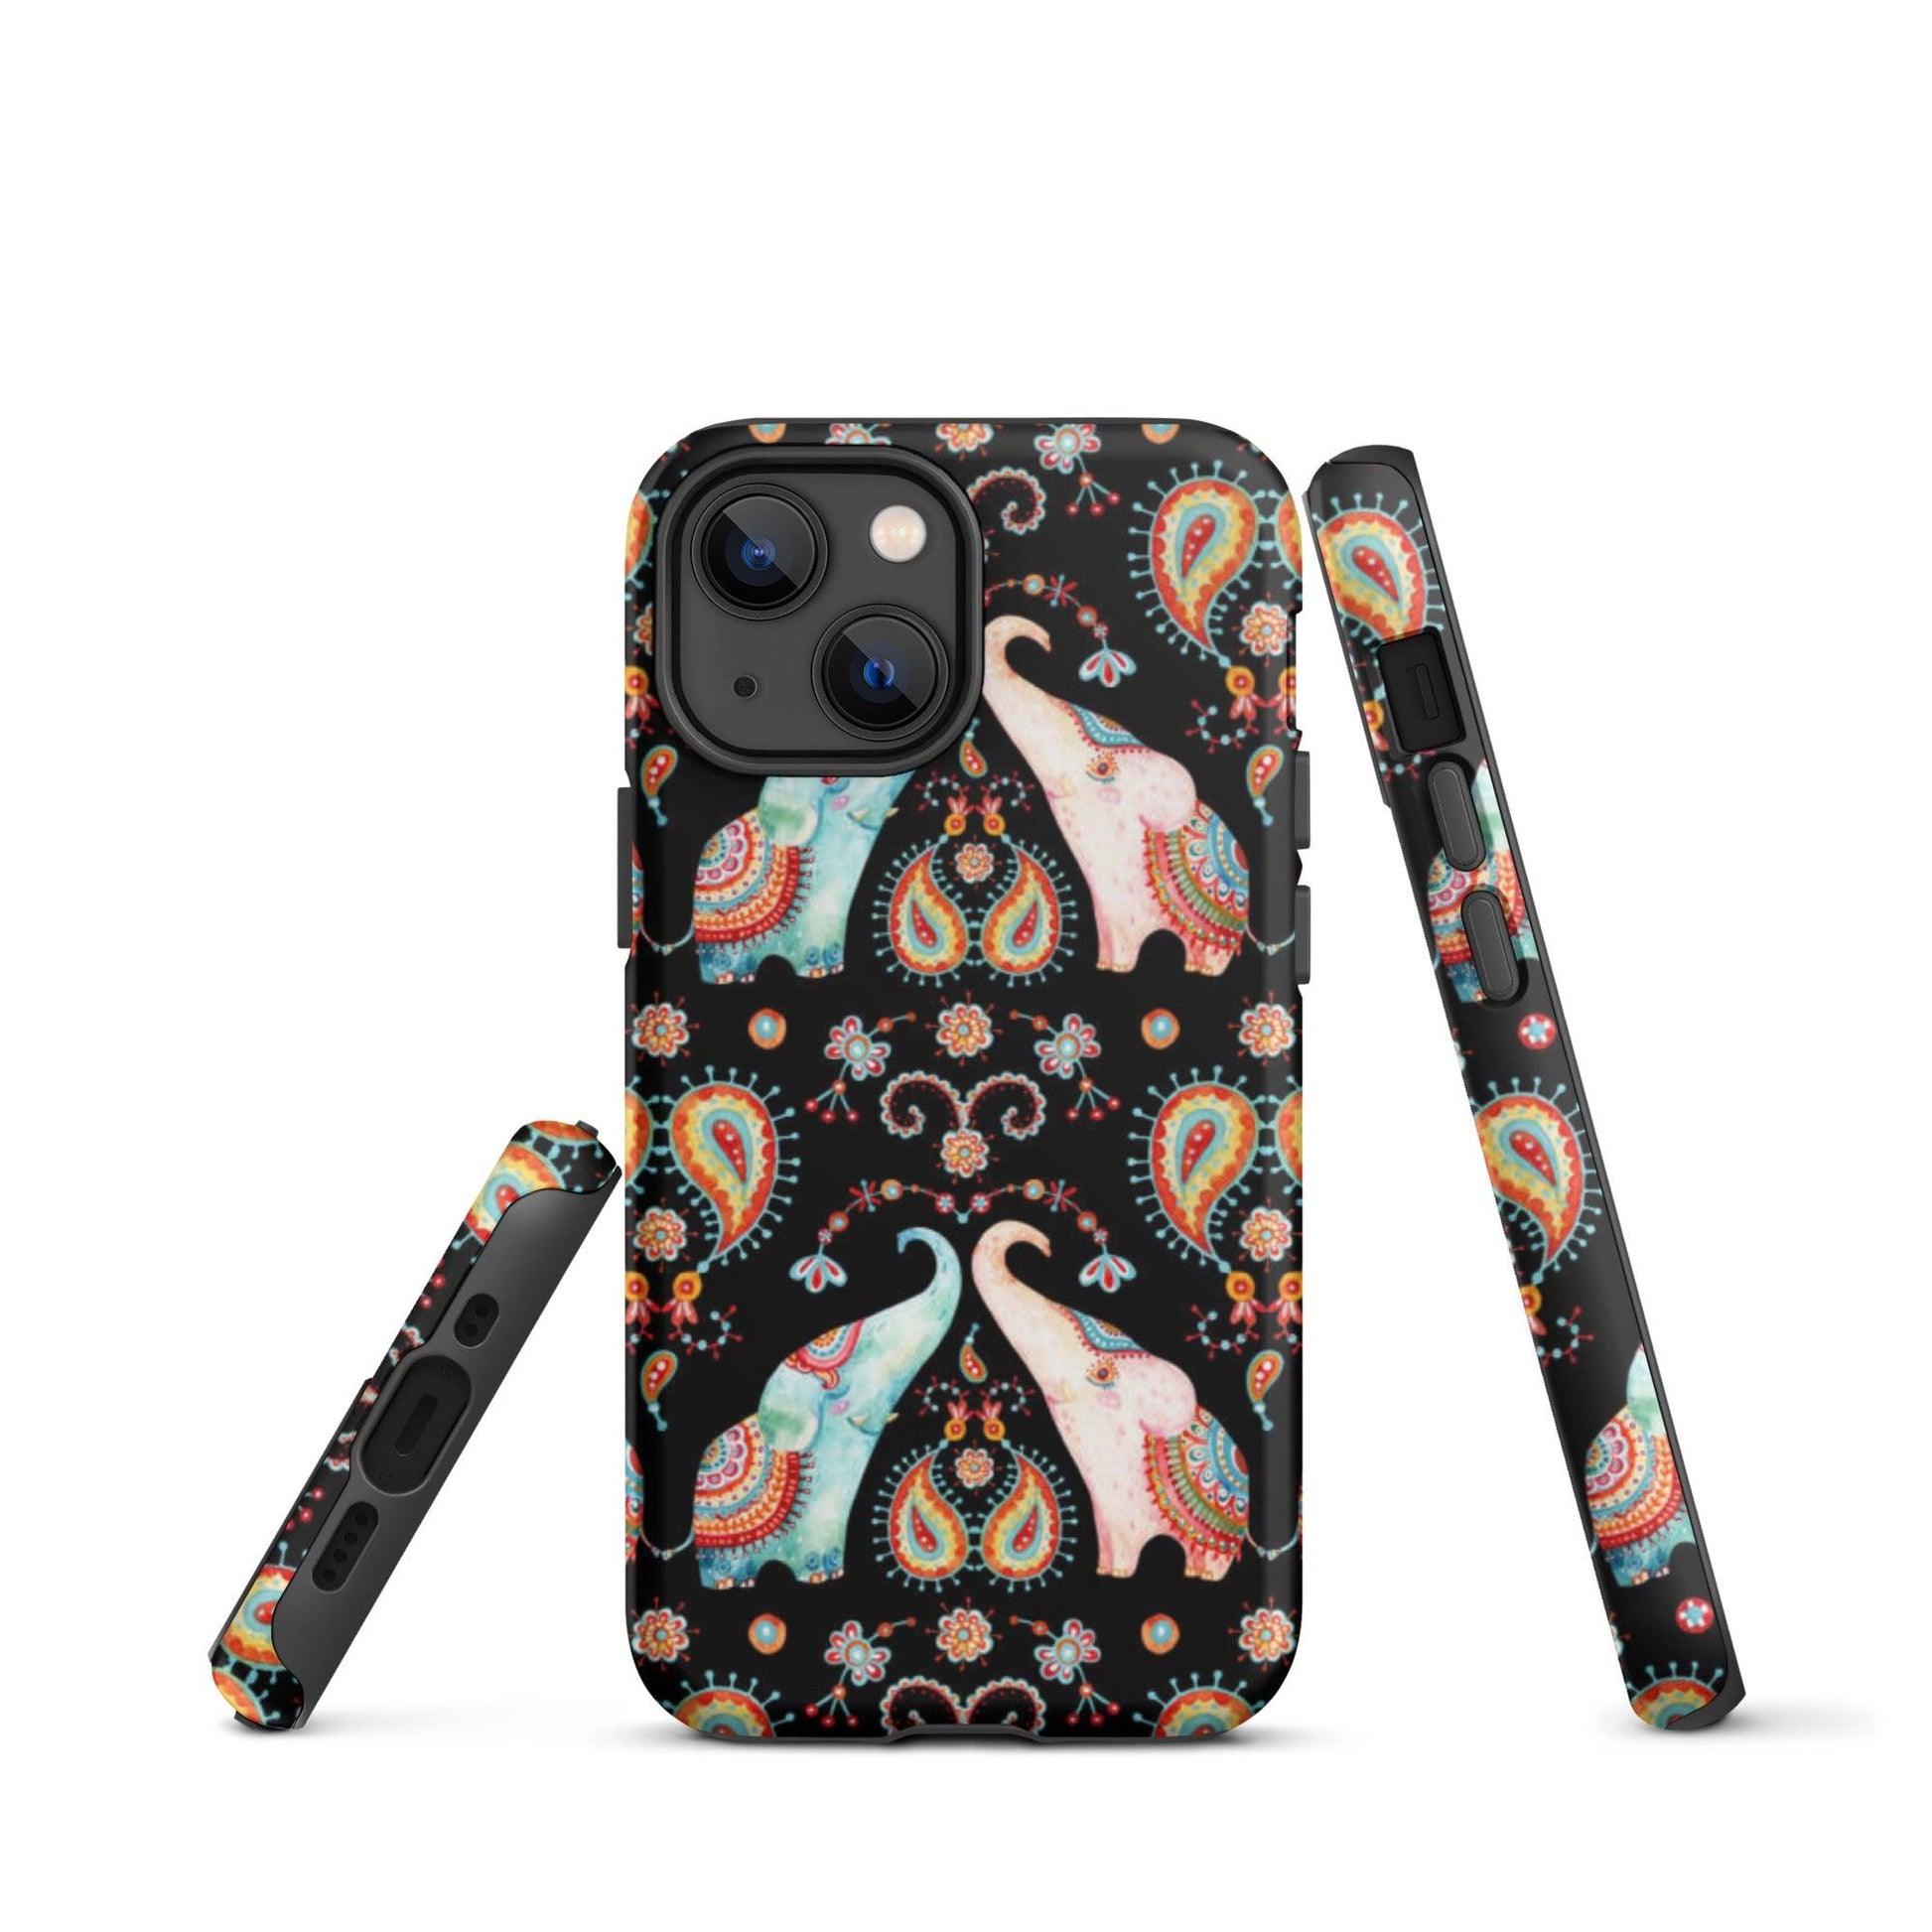 Indian Elephants Tough iPhone case - The Global Wanderer